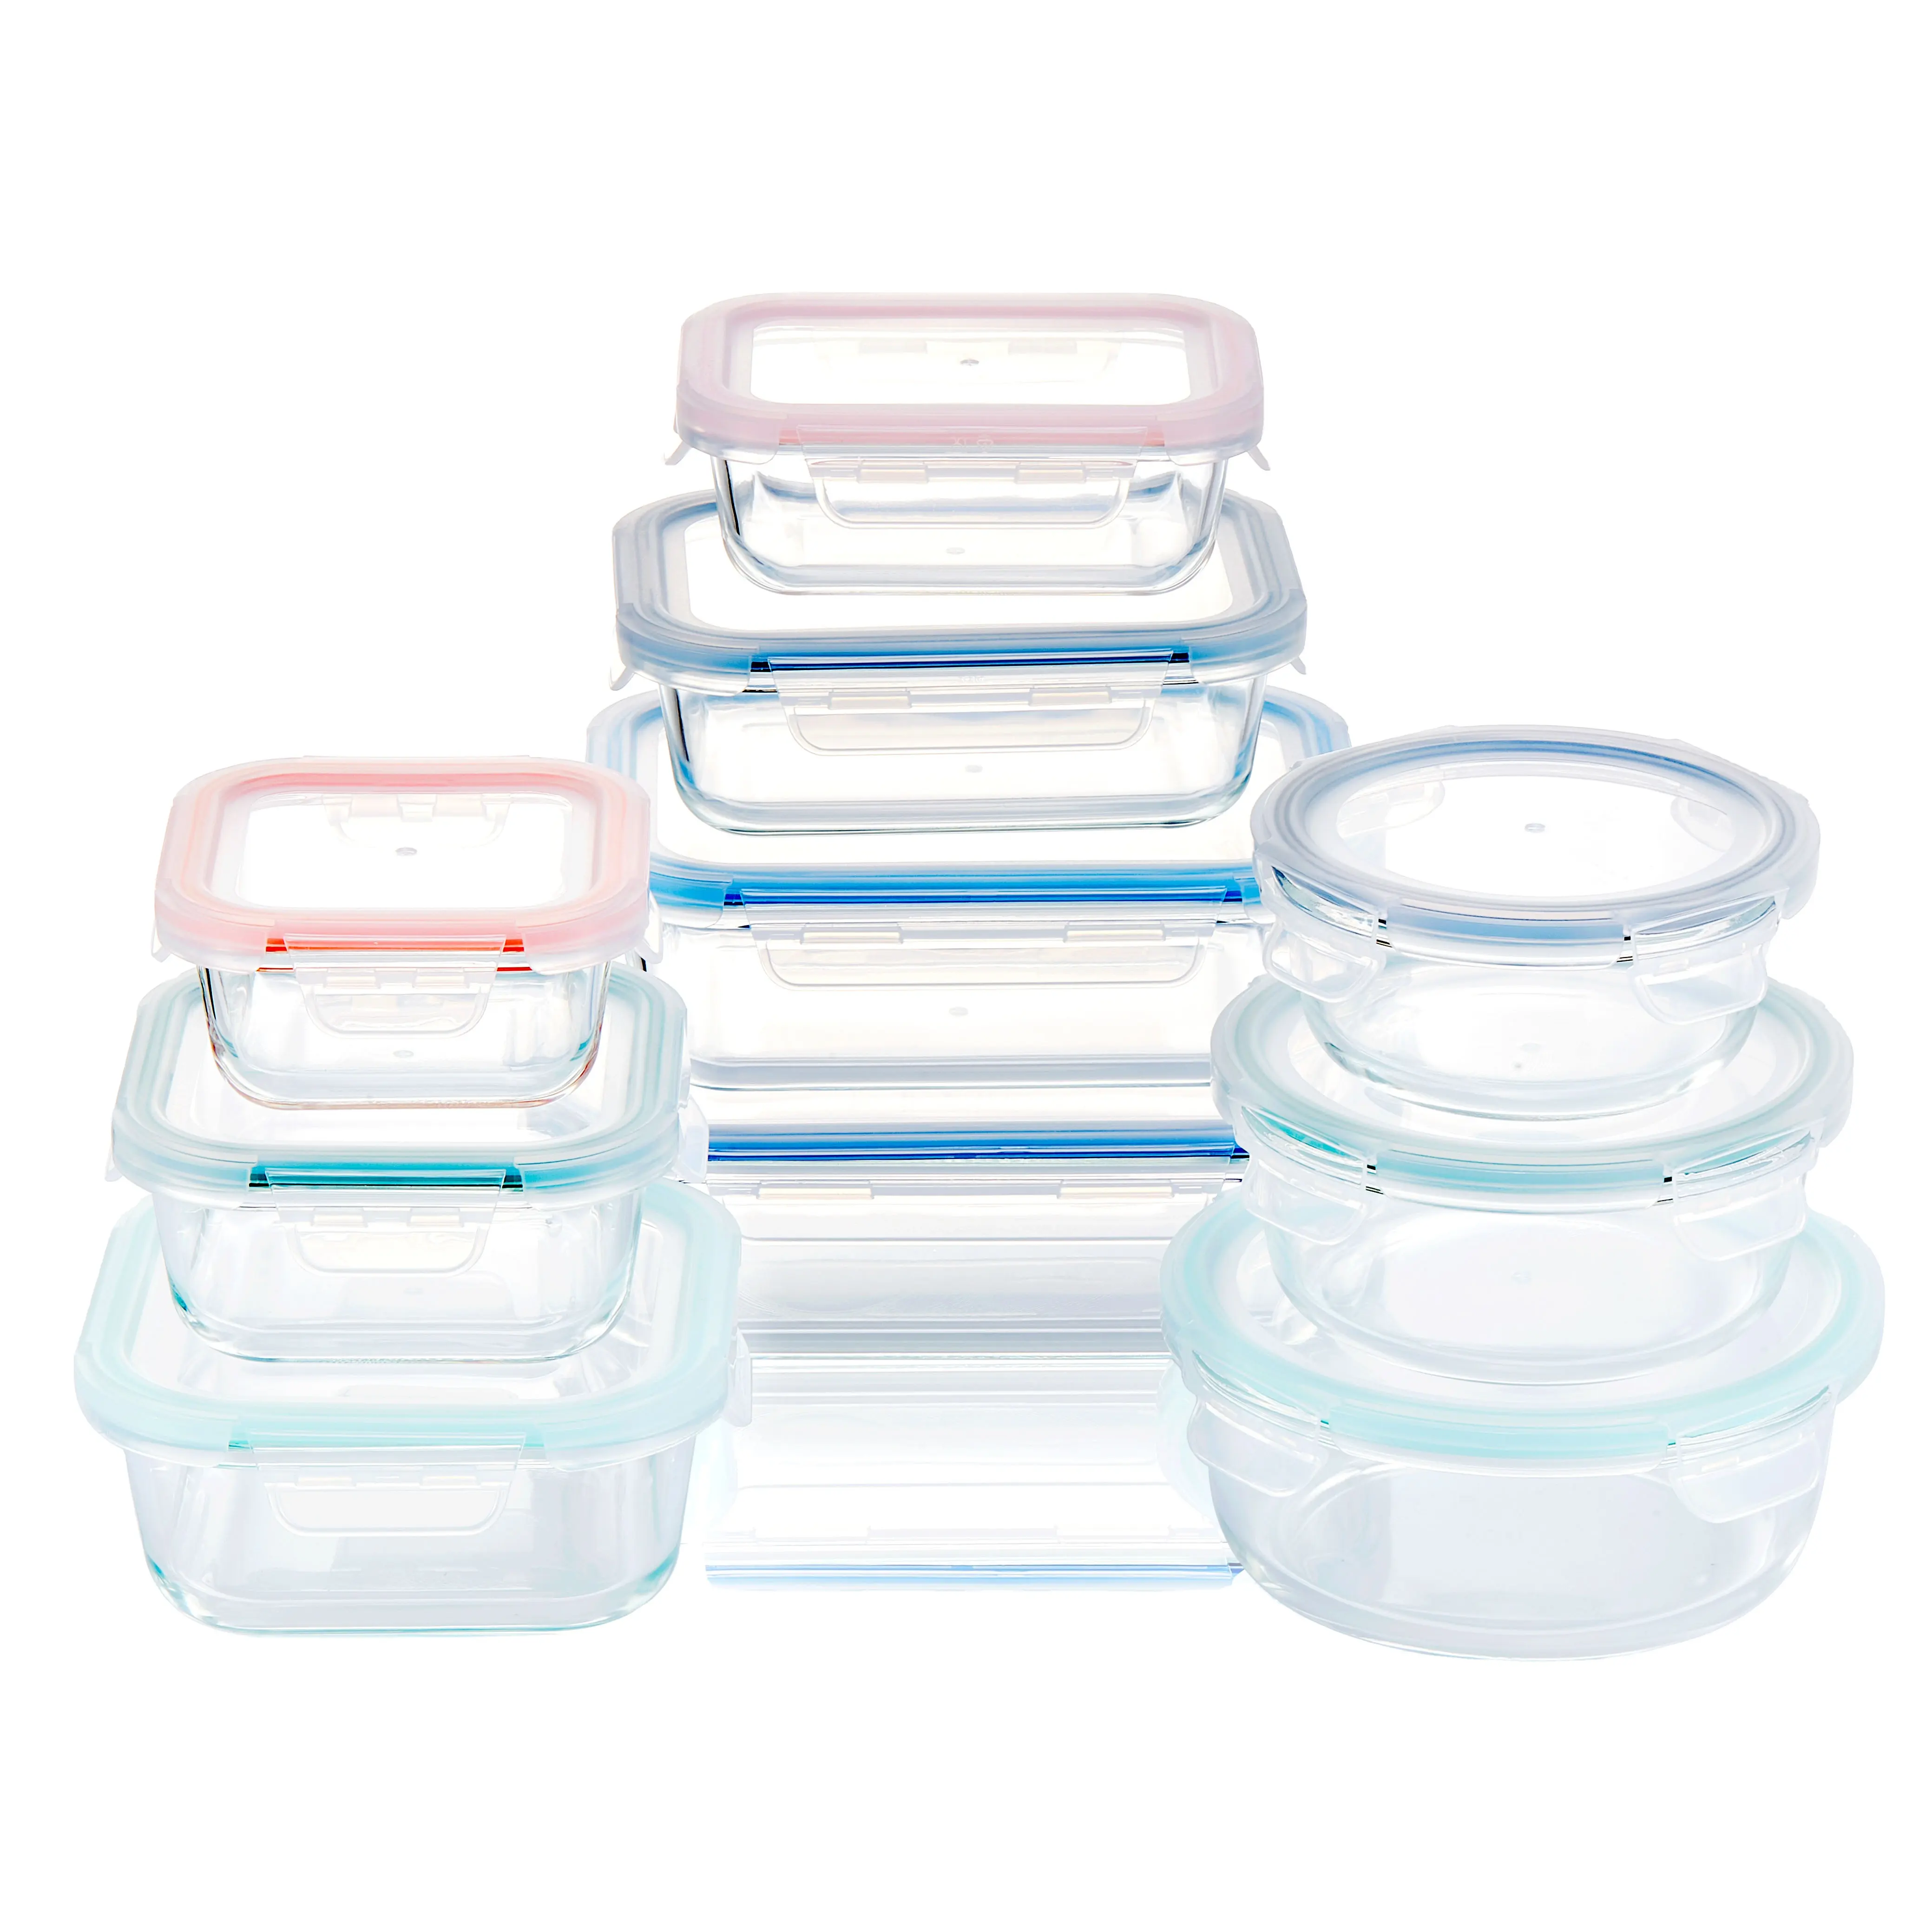 LINUO 3/4/5 Set Gift Package Heat Resistant Lunch Kitchen Meal Food Storage Container Set Glass With Airtight Lid